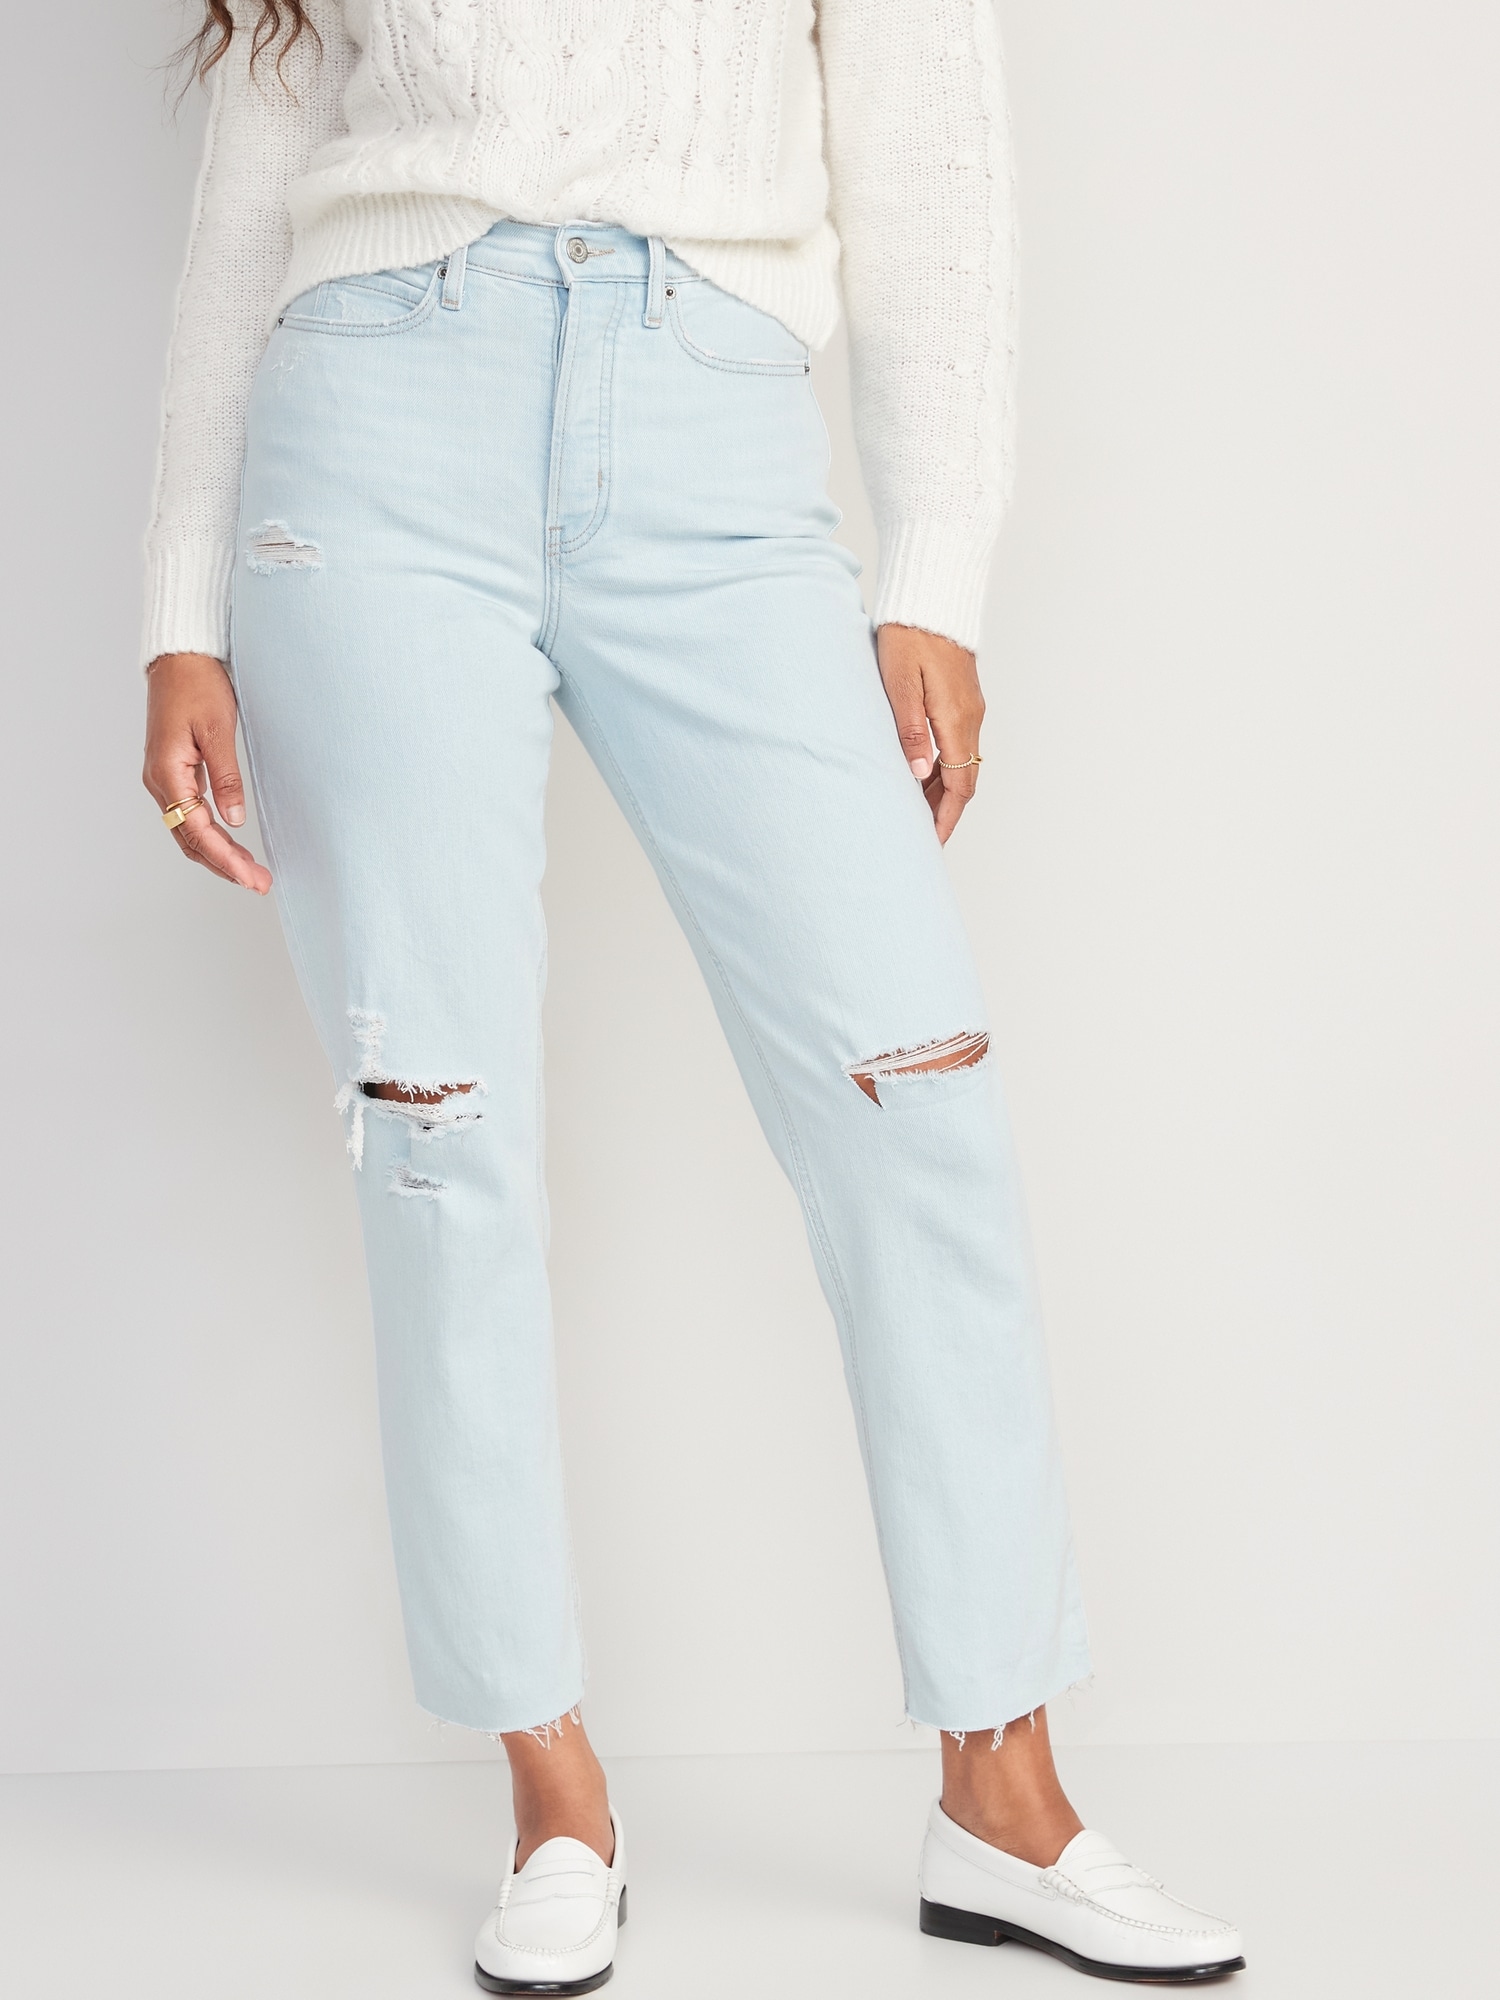 Old Navy Curvy Extra High-Waisted Button-Fly Sky-Hi Straight Ripped Cut-Off Jeans for Women blue. 1